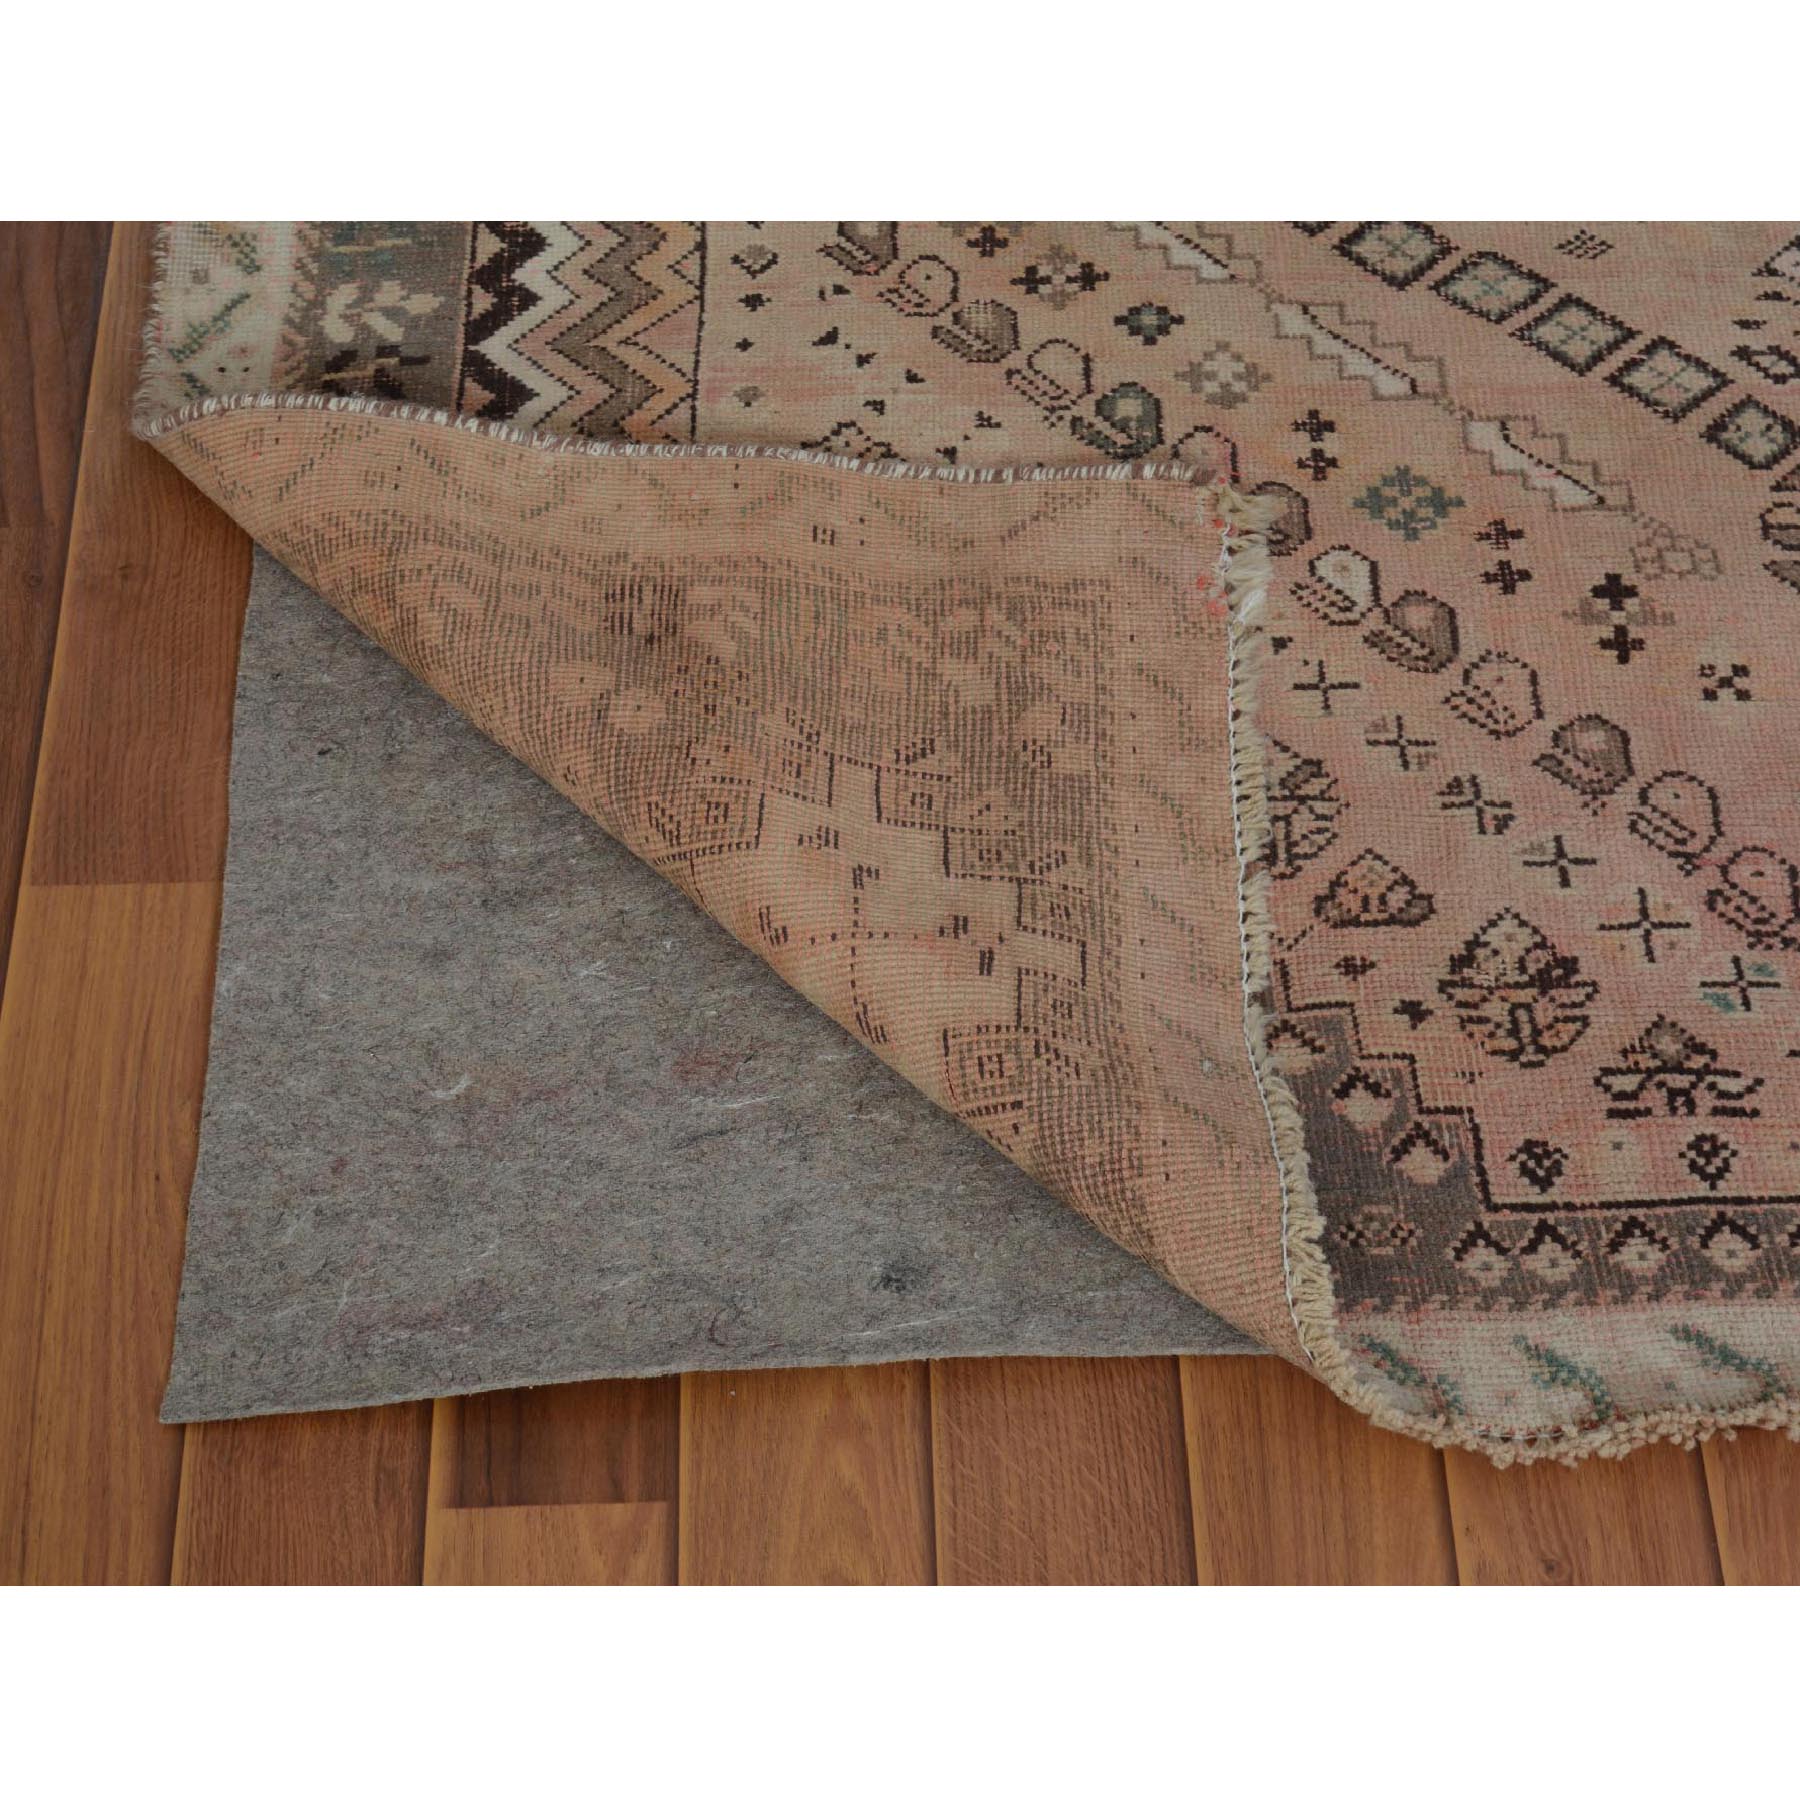 5-1 x7-10  Natural Colors Vintage And Worn Down Persian Shiraz Hand Knotted Oriental Rug 